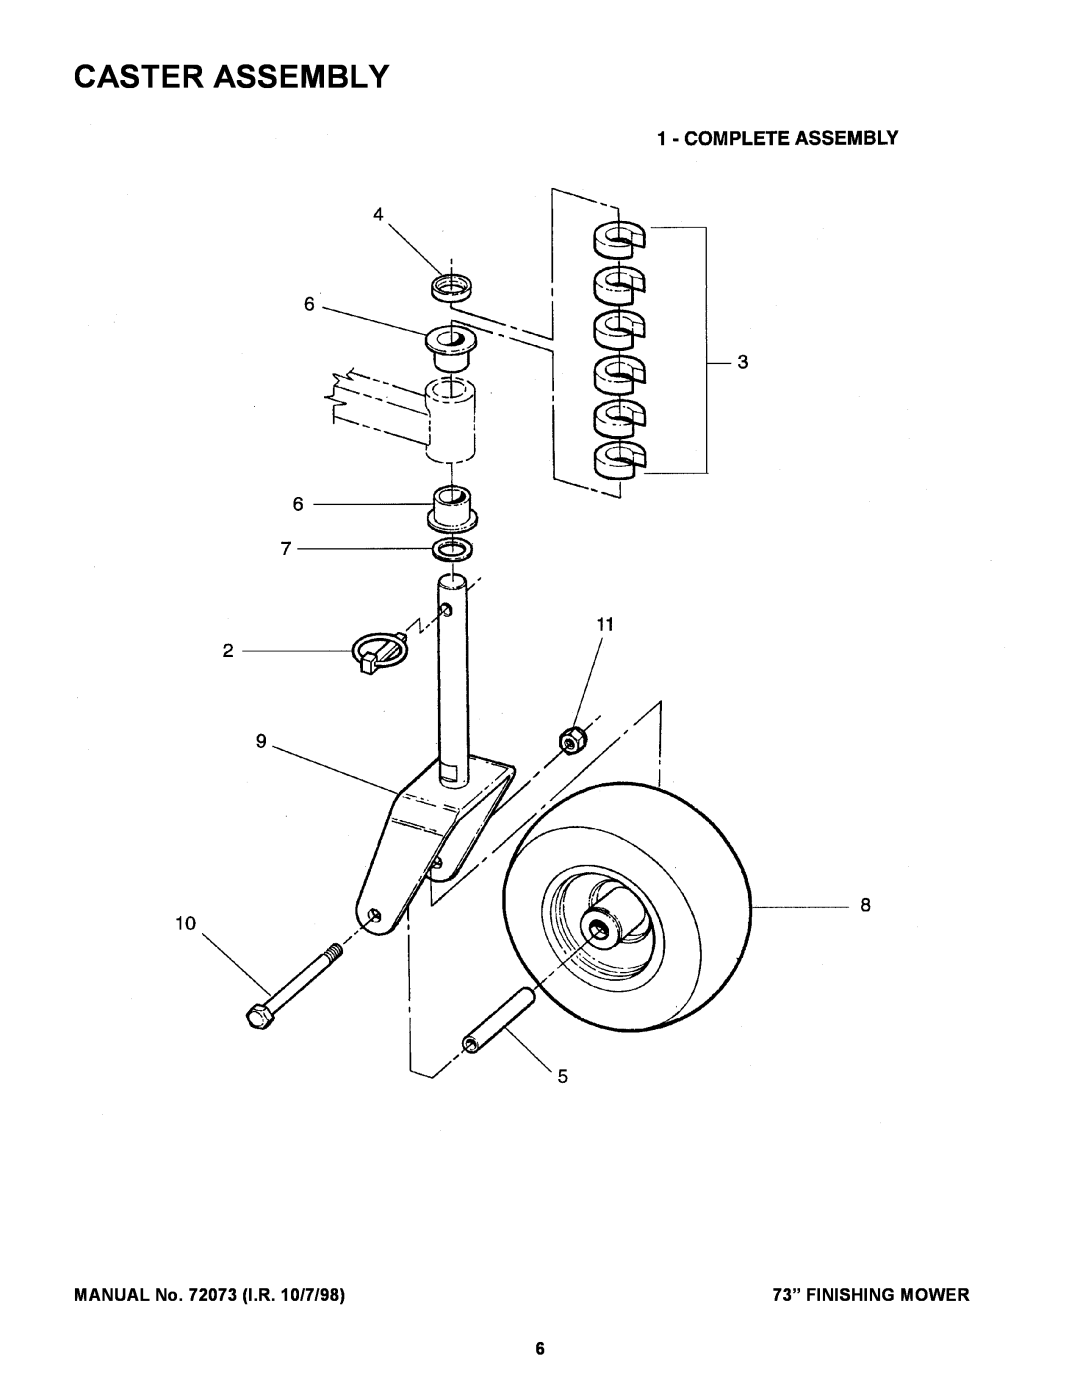 Snapper Finishing Mower manual Caster Assembly, MANUAL No. 72073 I.R. 10/7/98, 73” FINISHING MOWER 